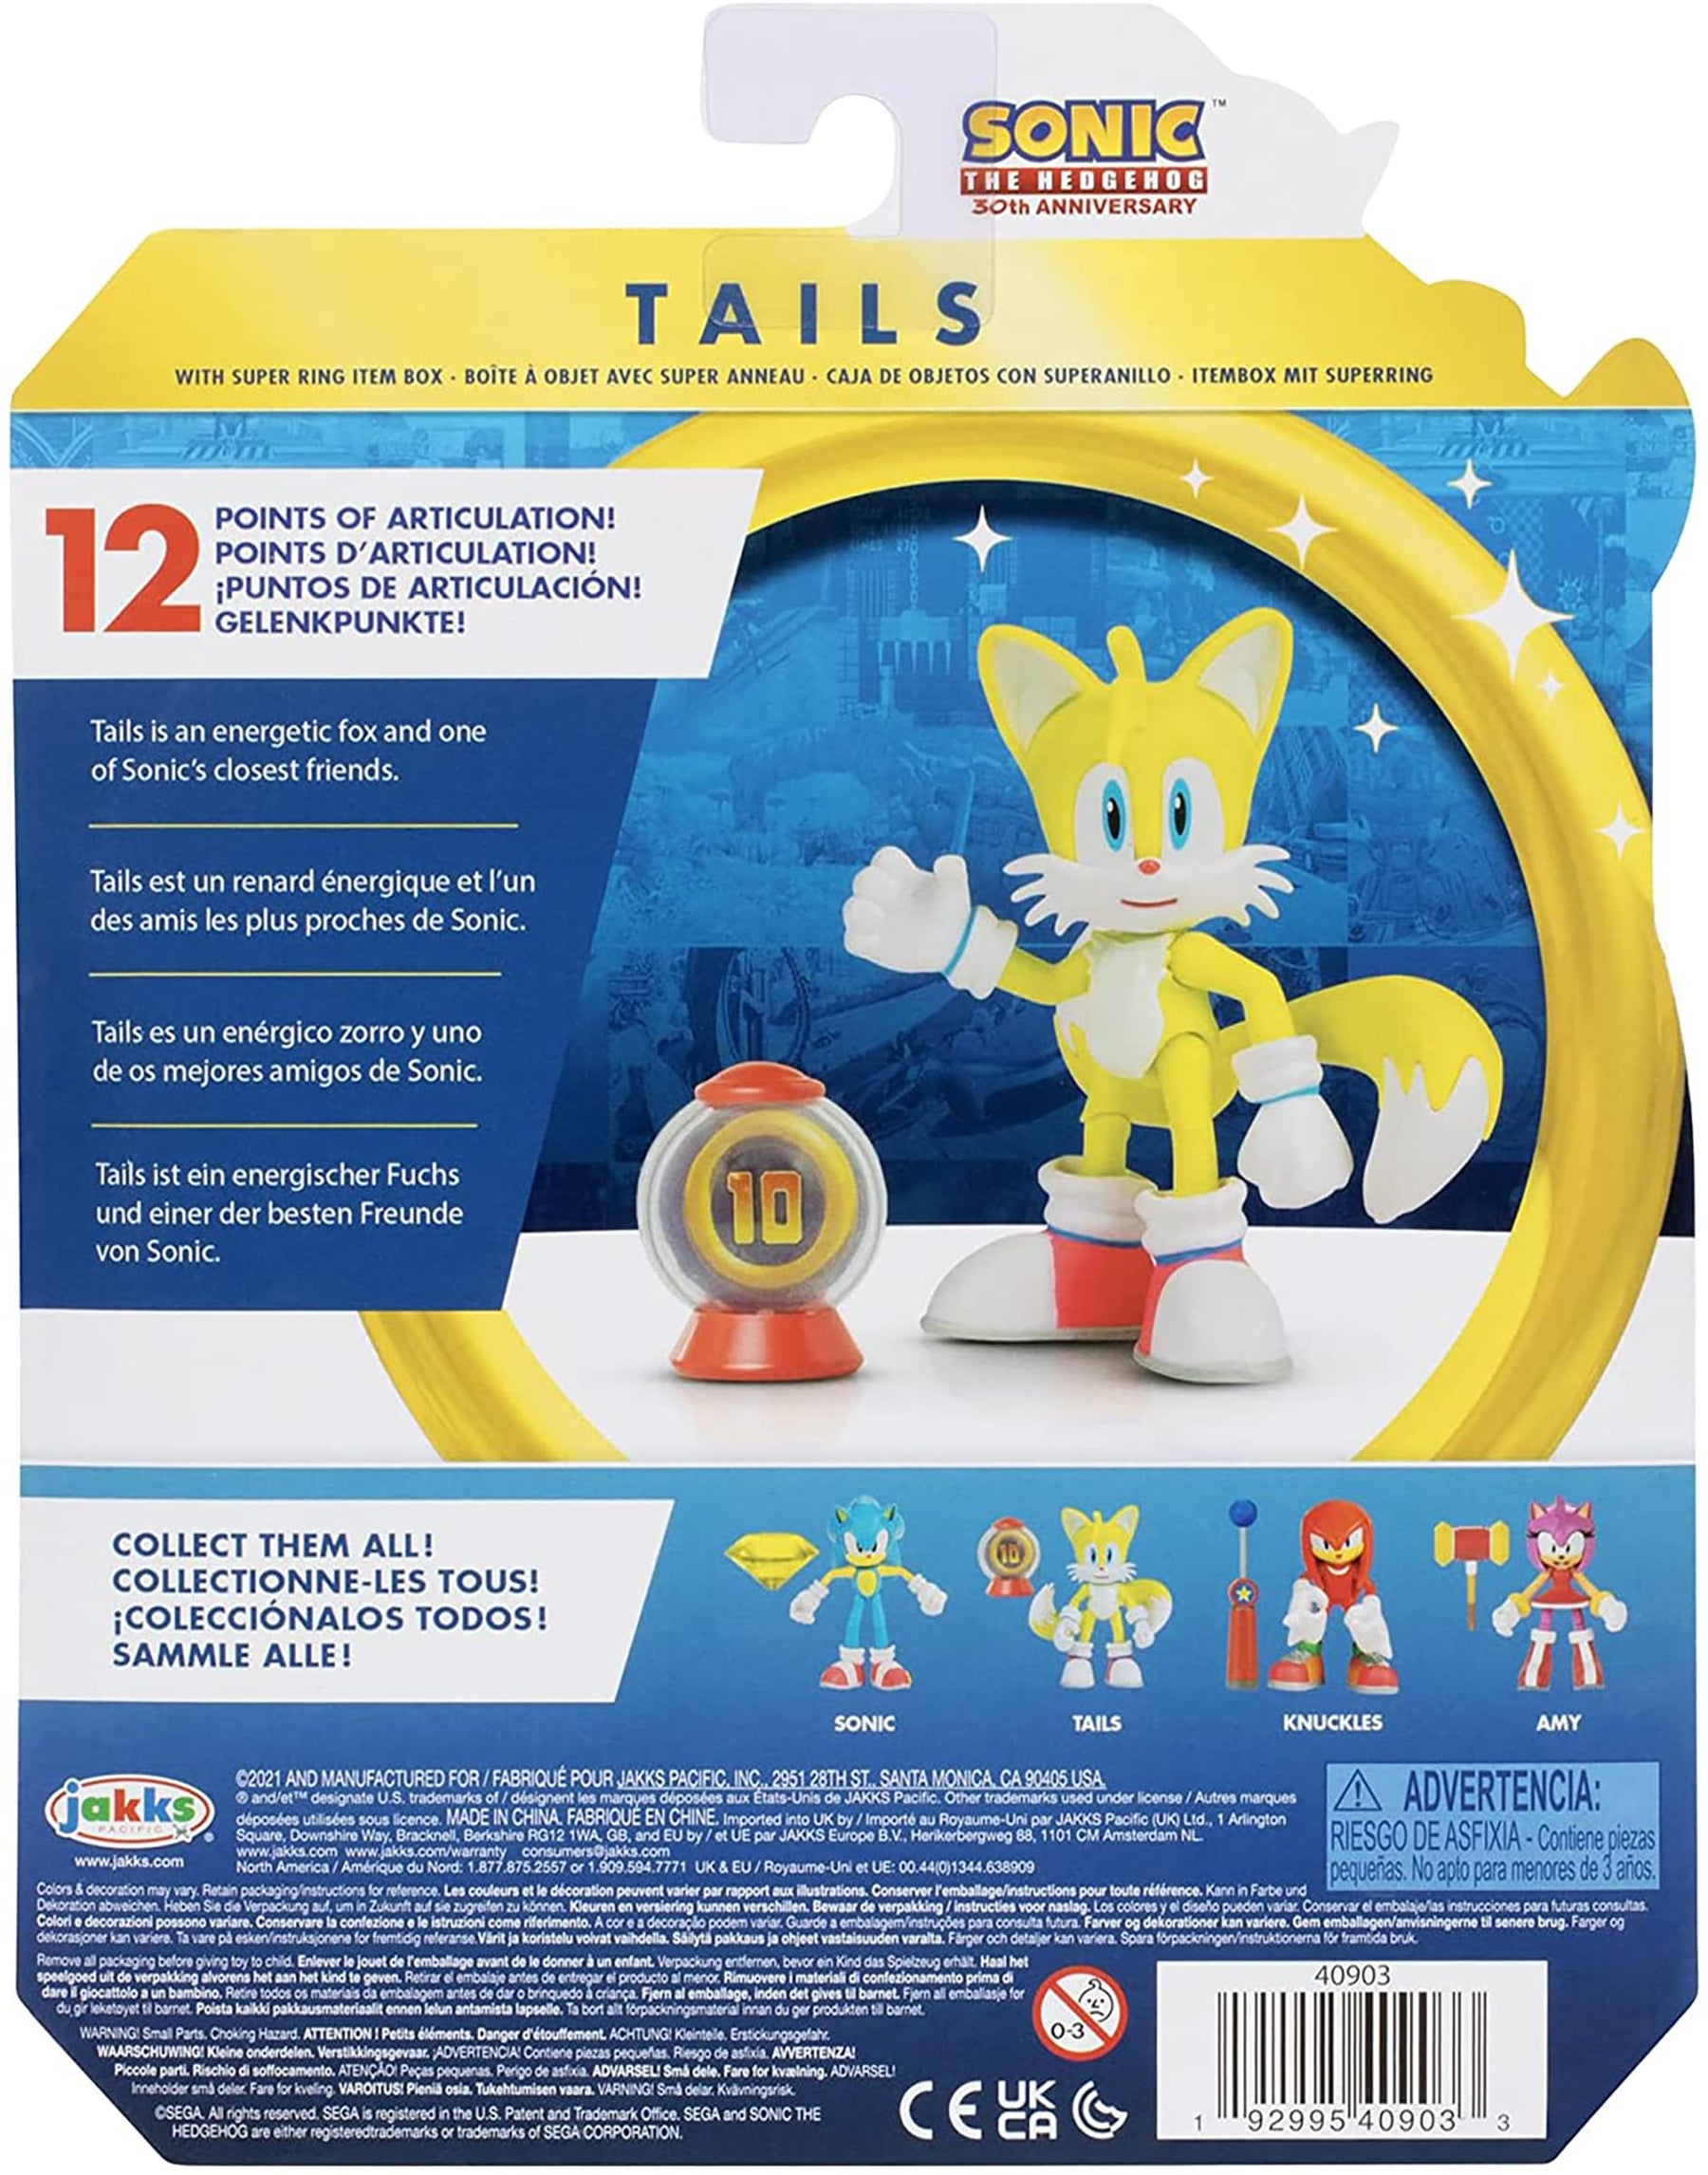 Sonic the Hedgehog 4 Inch Figure | Modern Tails with Ring Item Box